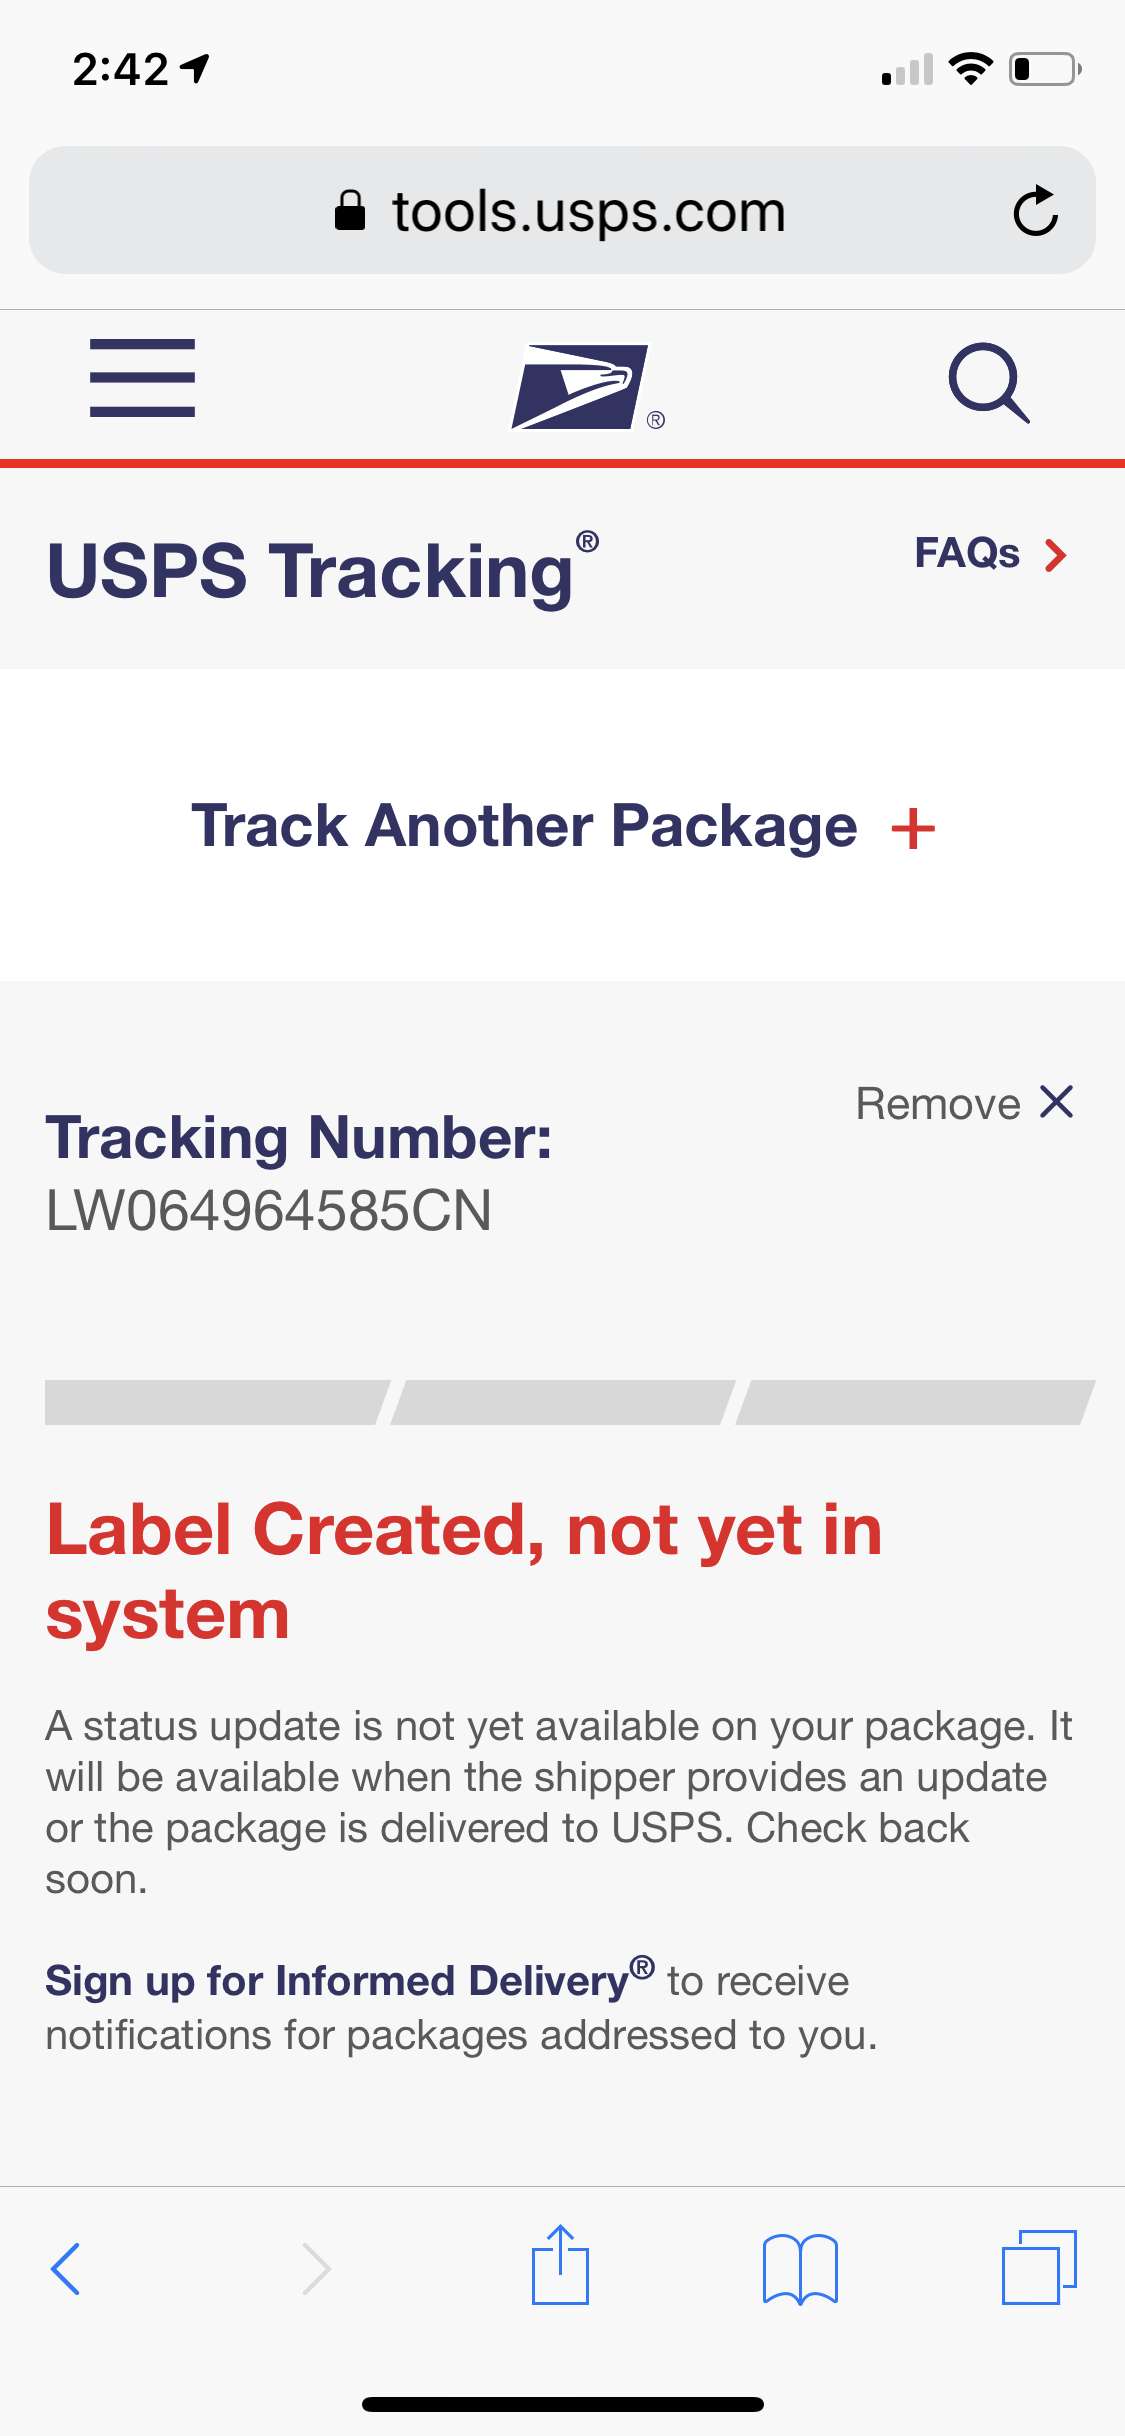 Second bogus tracking number 